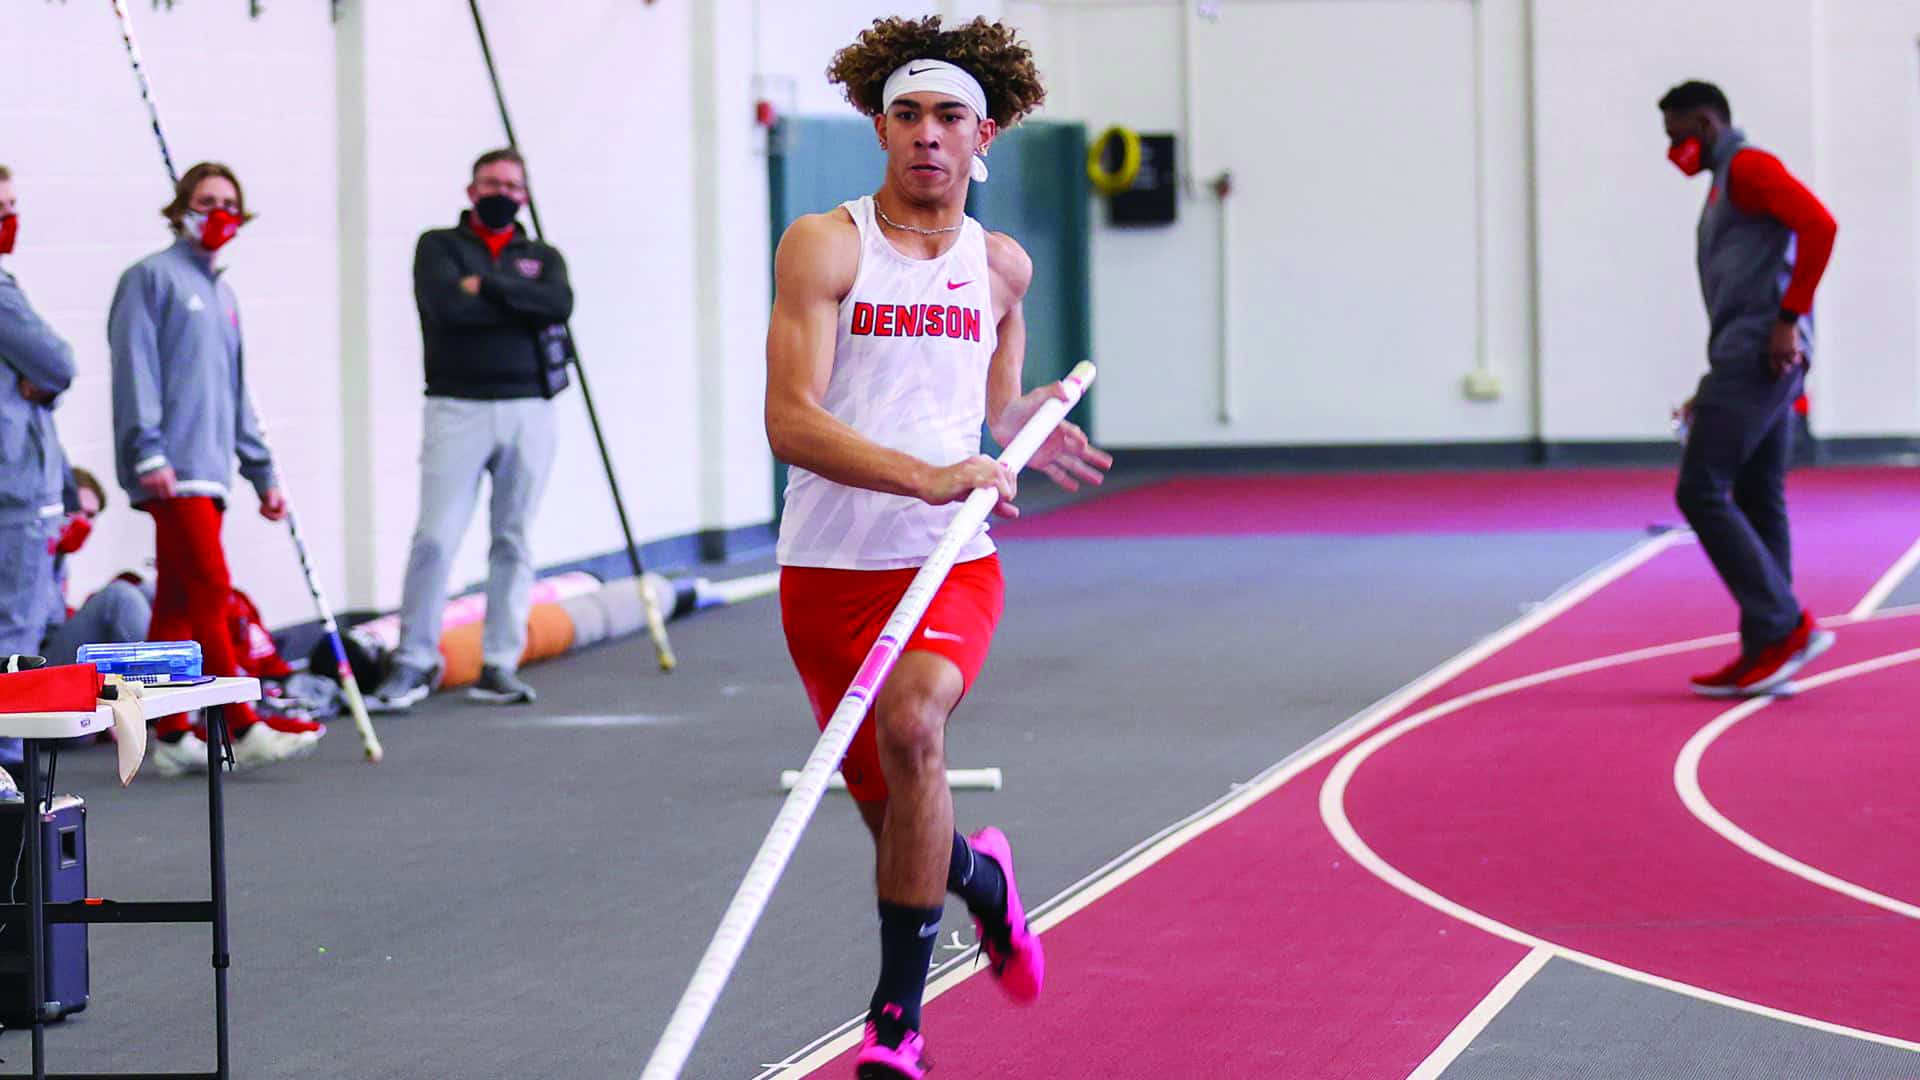 Men's Track & Field finishes second at OWU - Denison University